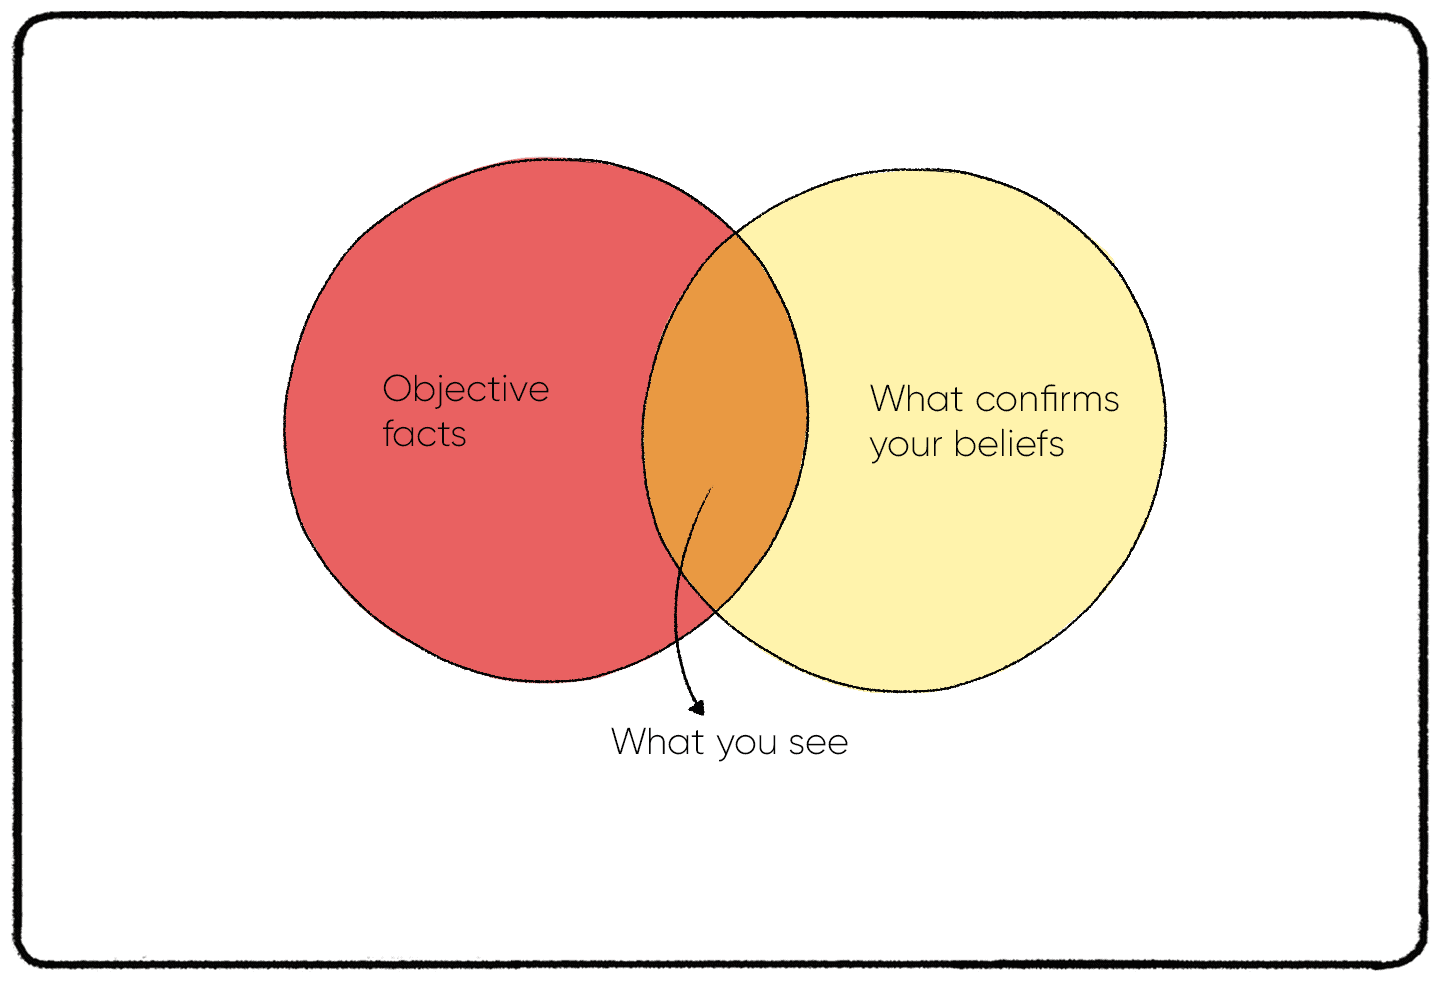 venn diagram describing how confirmation bias is the intersection of what we believe and objective facts